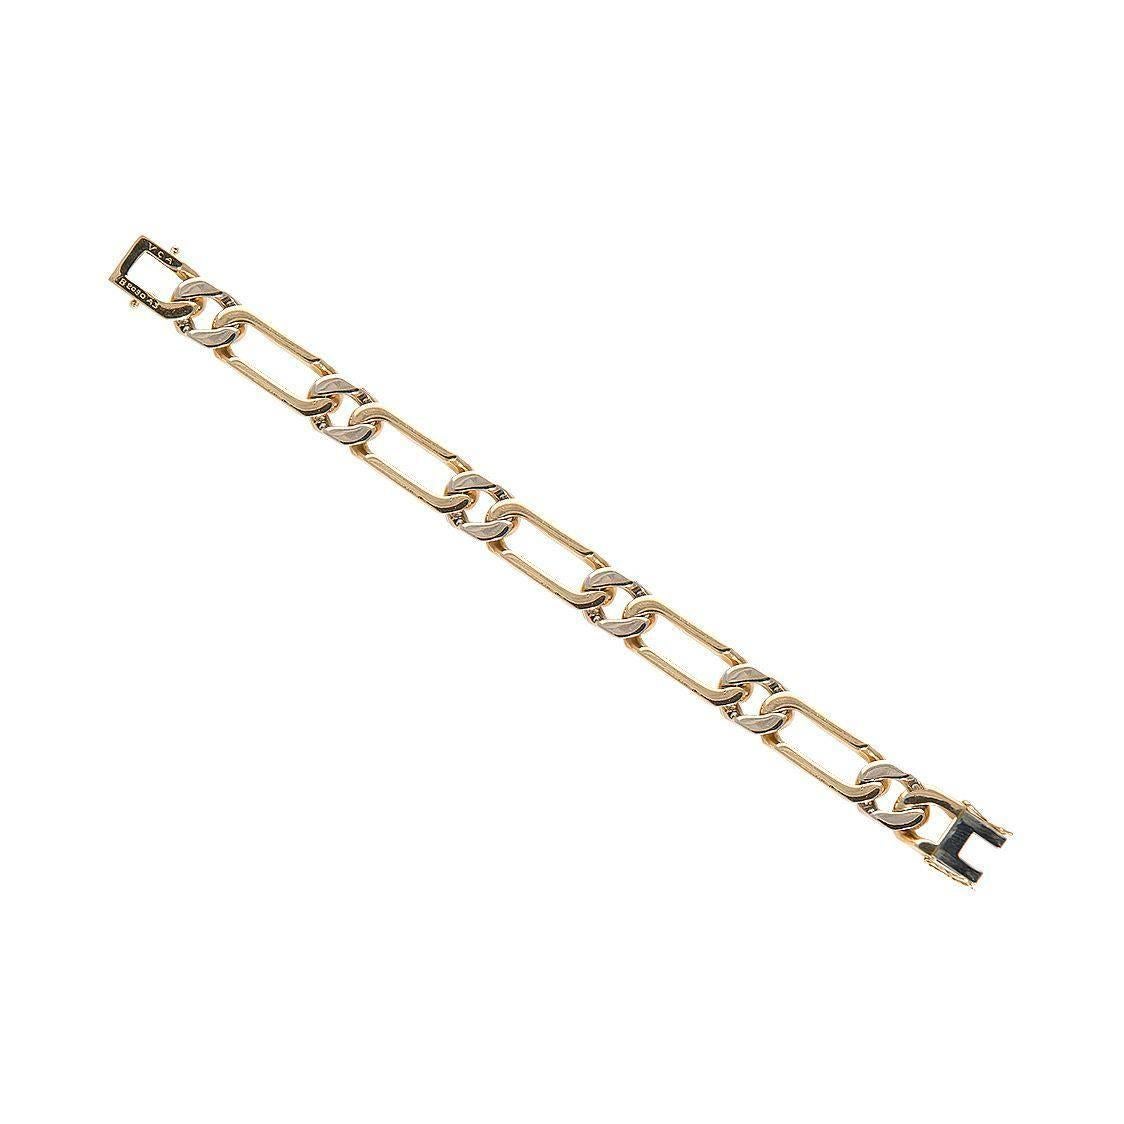 van CLEEF & ARPELS Bracelet yellow gold chain link, six patterns set with diamonds, signed and numbered B280A3, length 19.8 cm, width 1.1 cm, with original VCA case (73.8 grams)